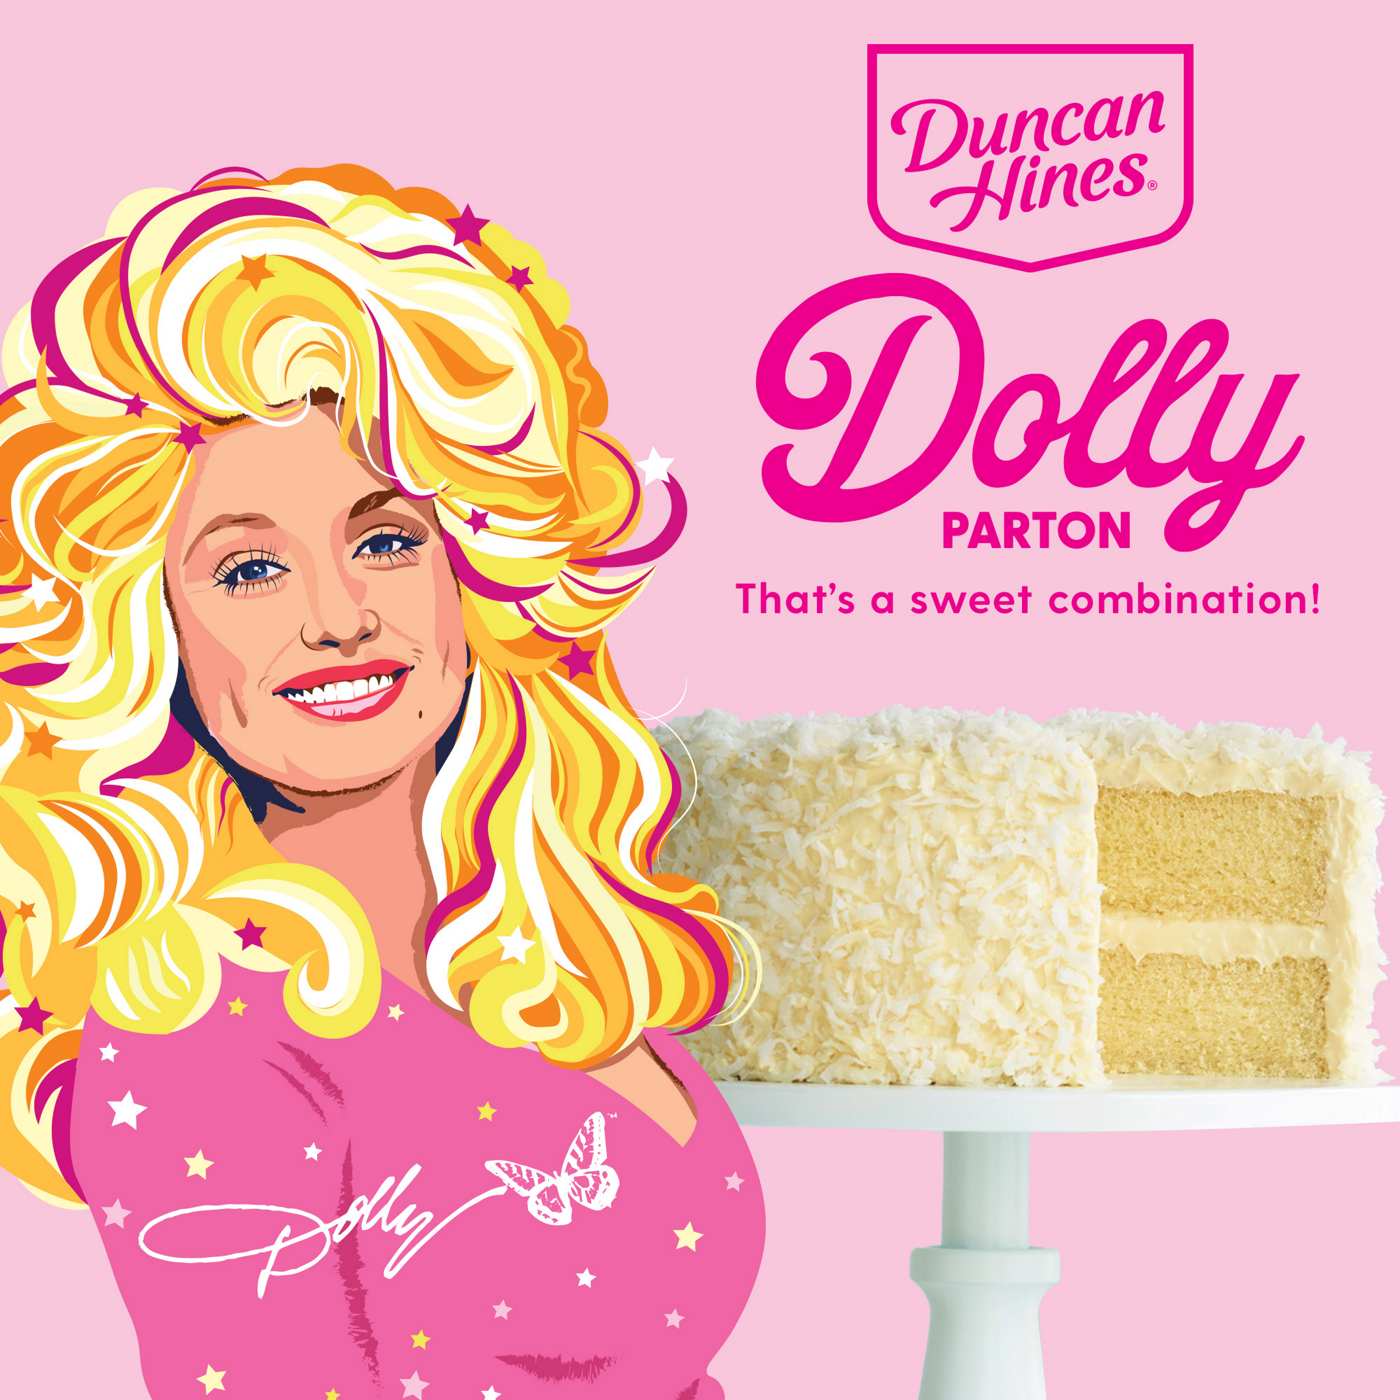 Duncan Hines Dolly Parton's Favorite Creamy Buttercream Flavored Cake Frosting; image 6 of 7